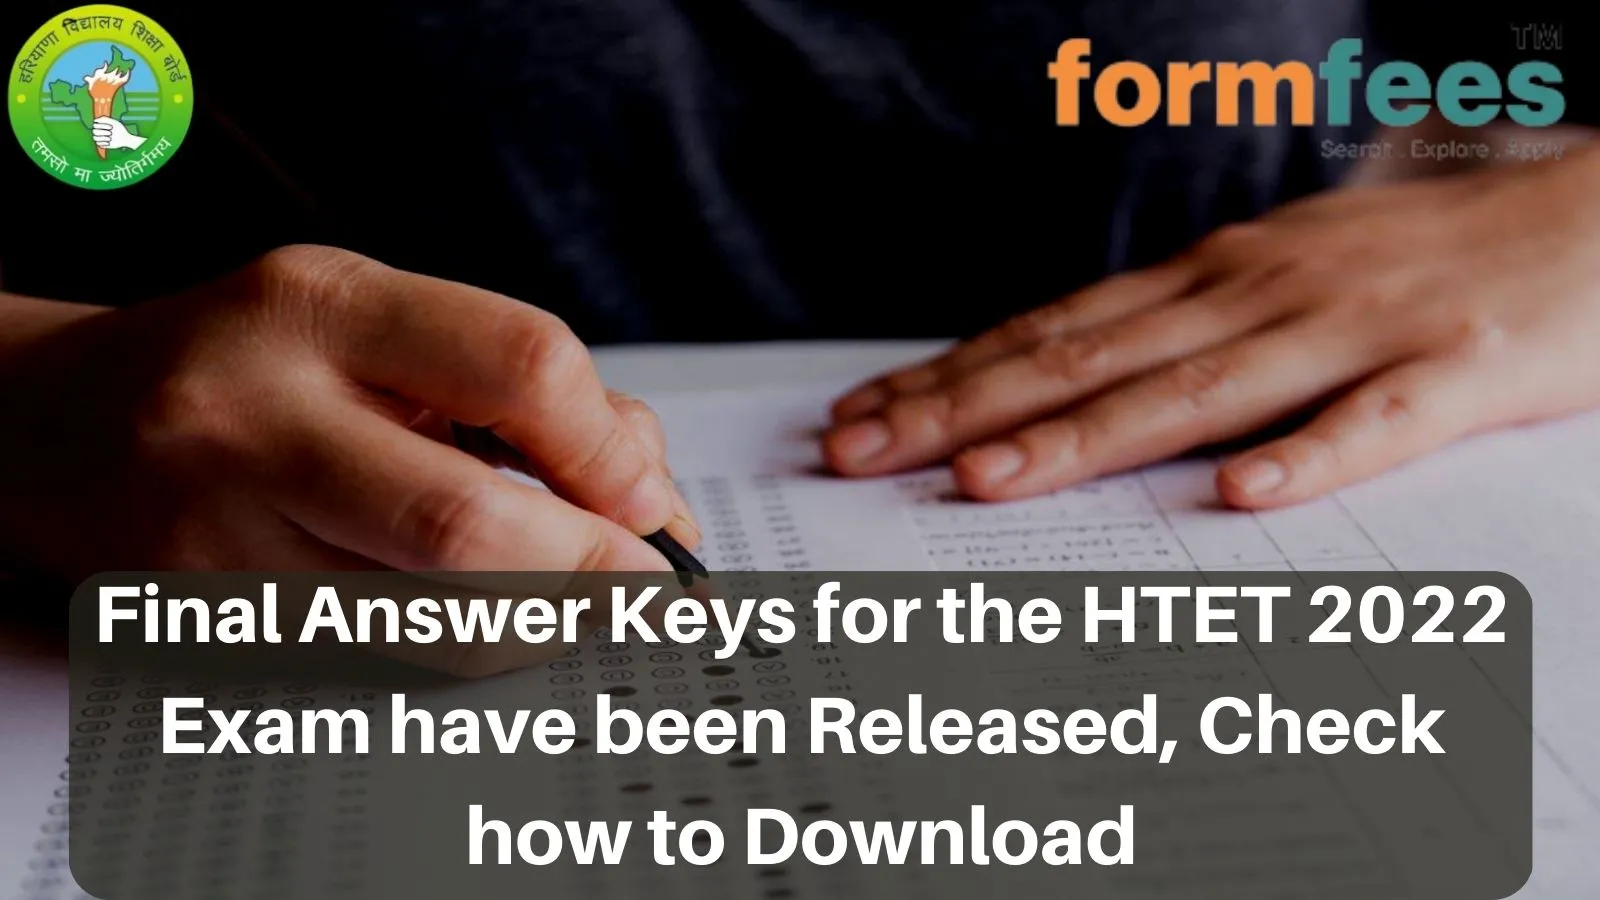 Final Answer Keys for the HTET 2022 Exam have been Released, Check how to Download